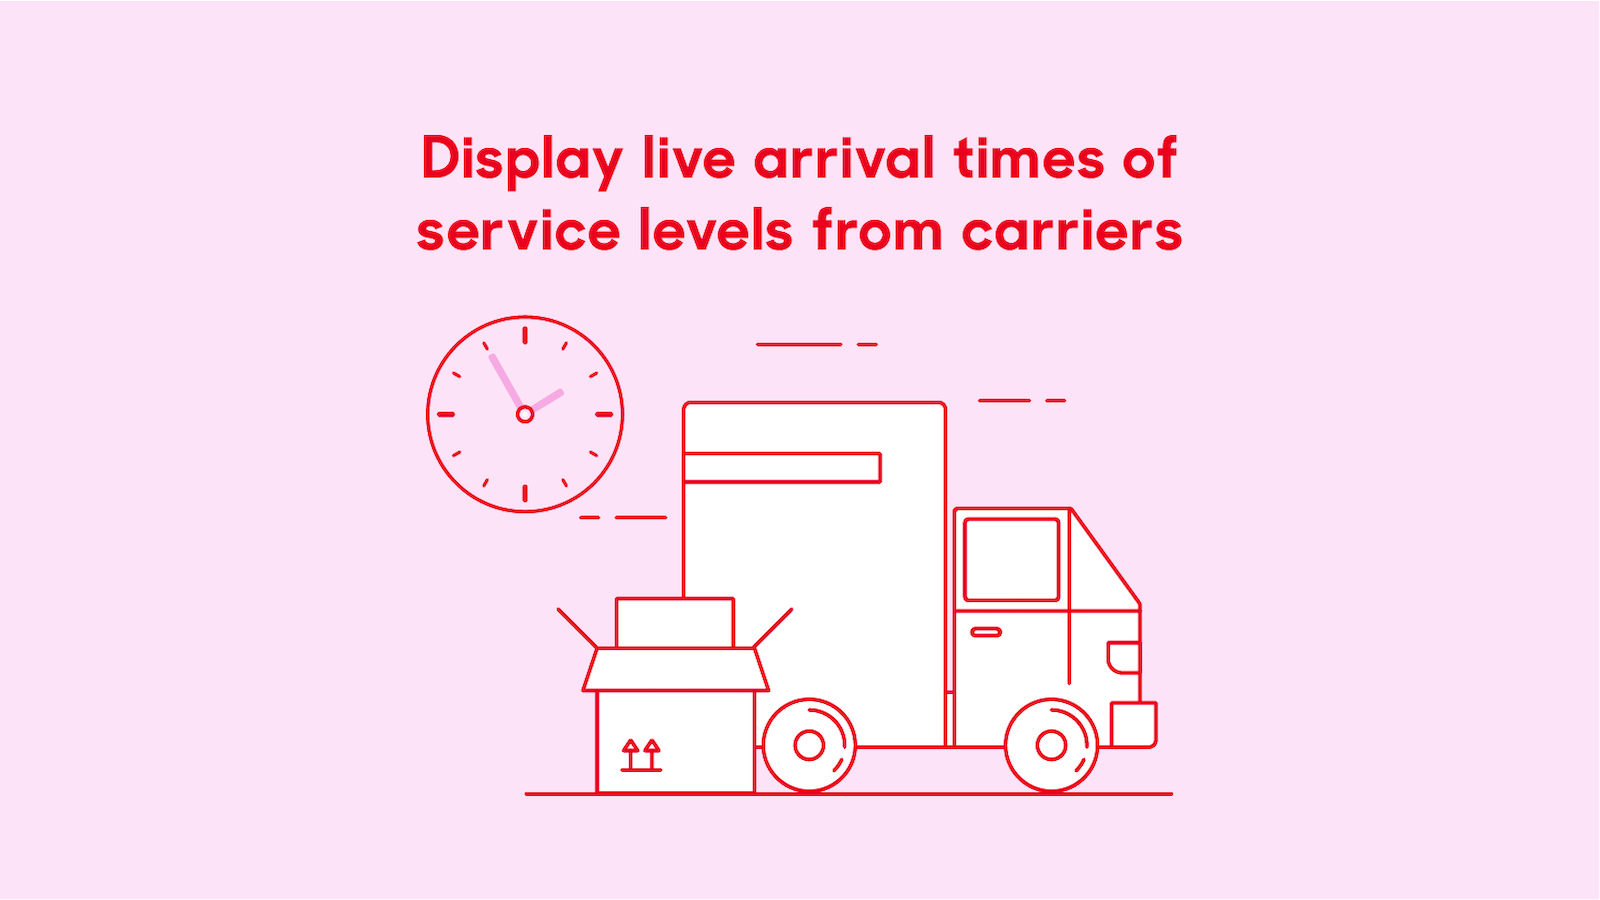 Display live arrival times of service levels from carriers